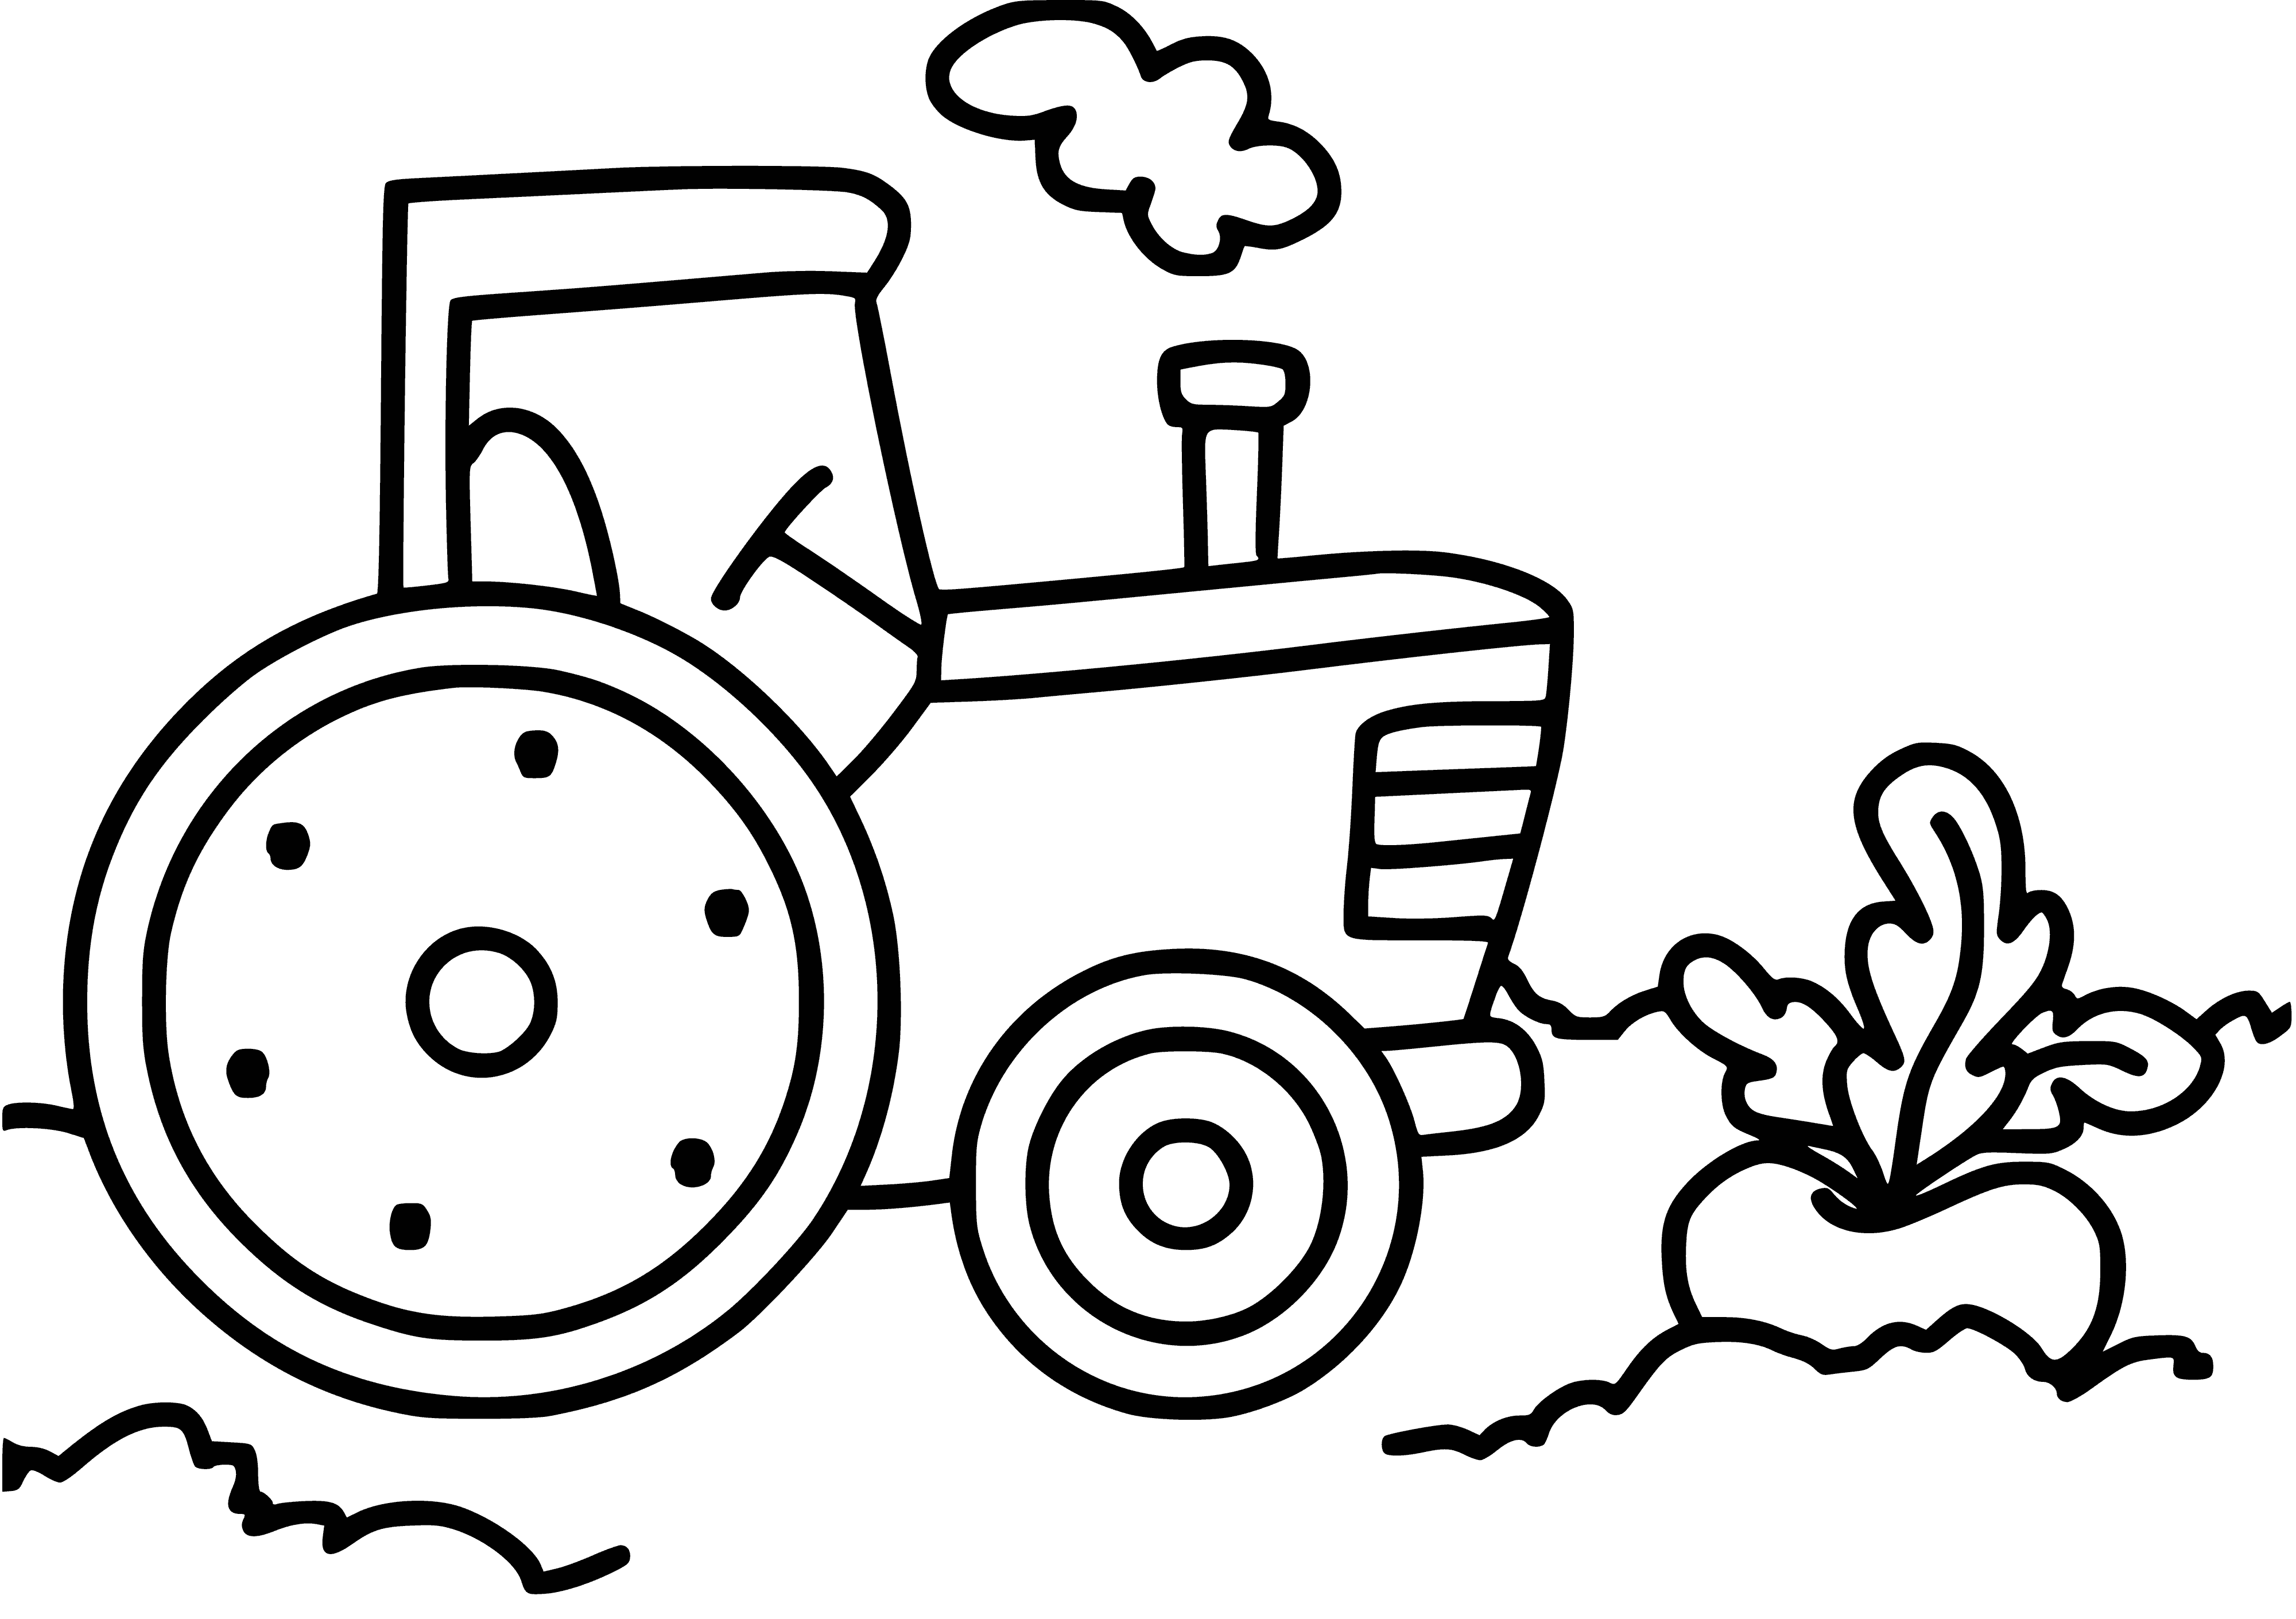 coloring page: Large green tractor, yellow/red wheels, yellow engine, red exhaust, black seat, small green flag -- a classic farming vehicle! #farmlife